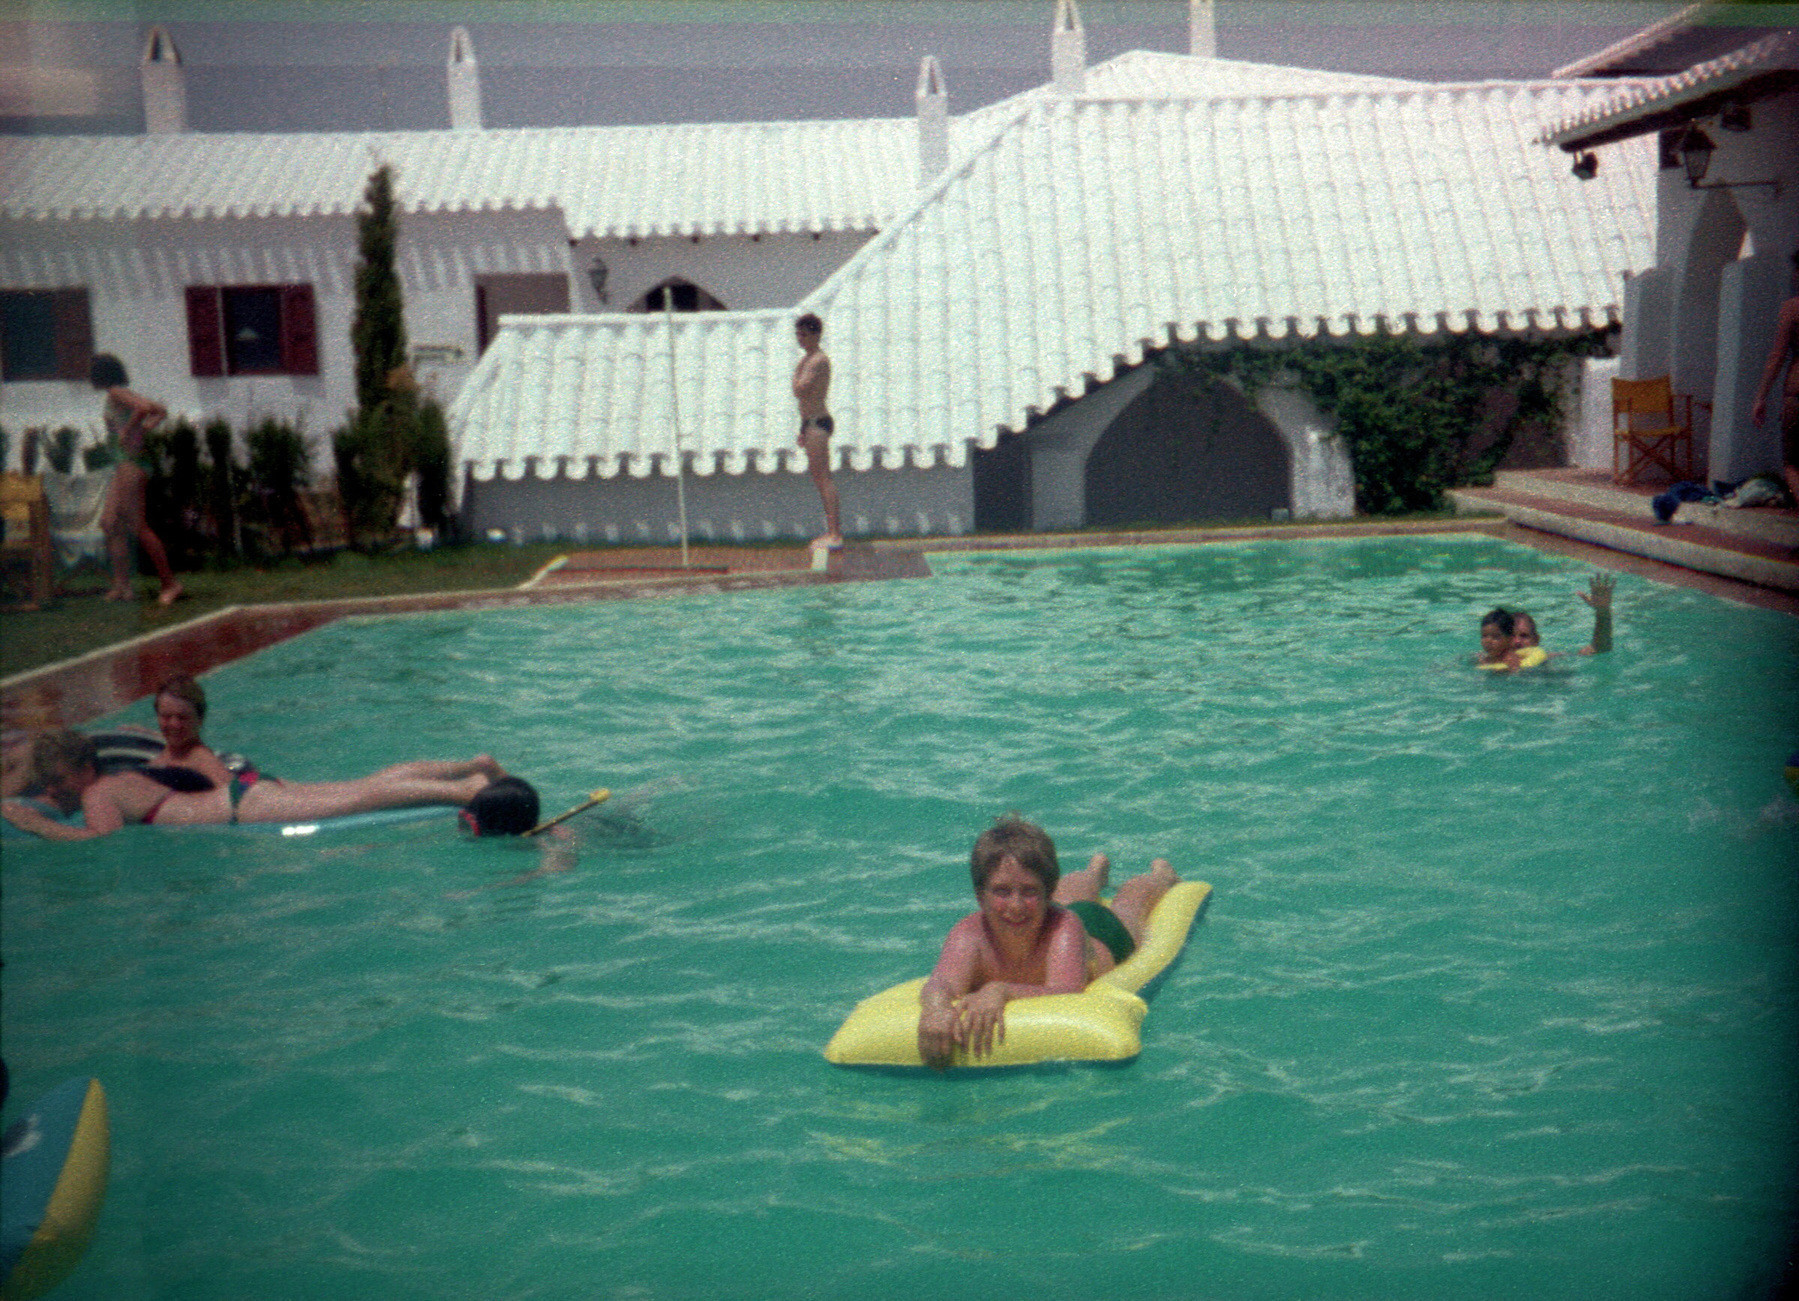 Me, on in a swimming pool, on holiday in Minorca in the 1980s